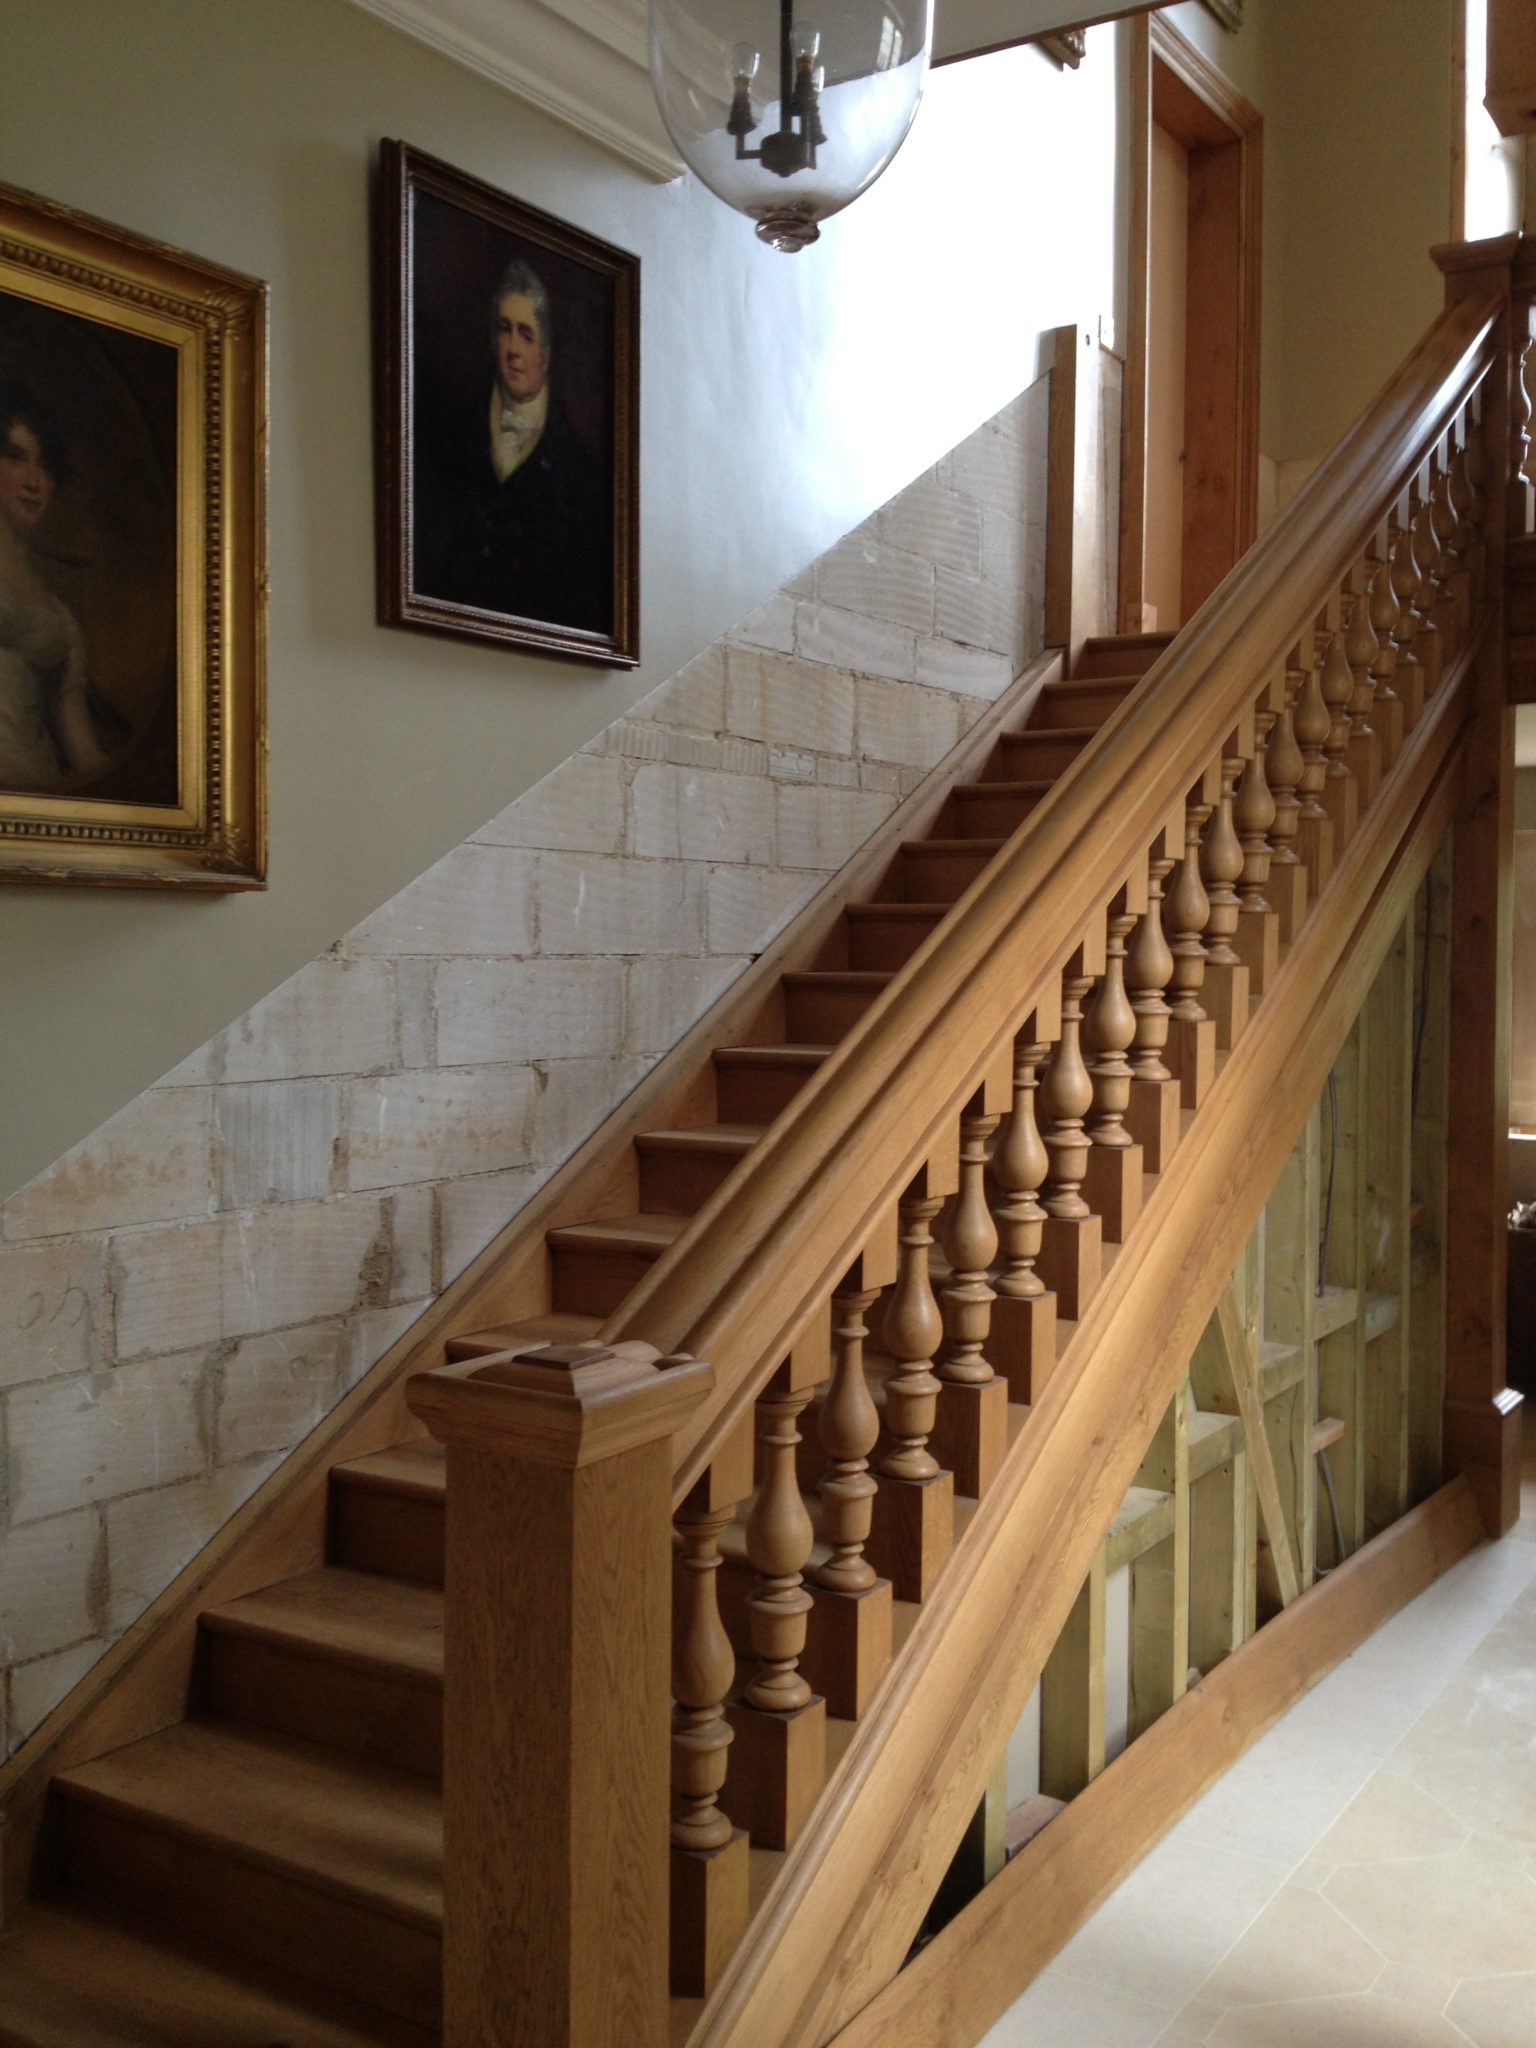 A staircase built by Shilstone's joiners